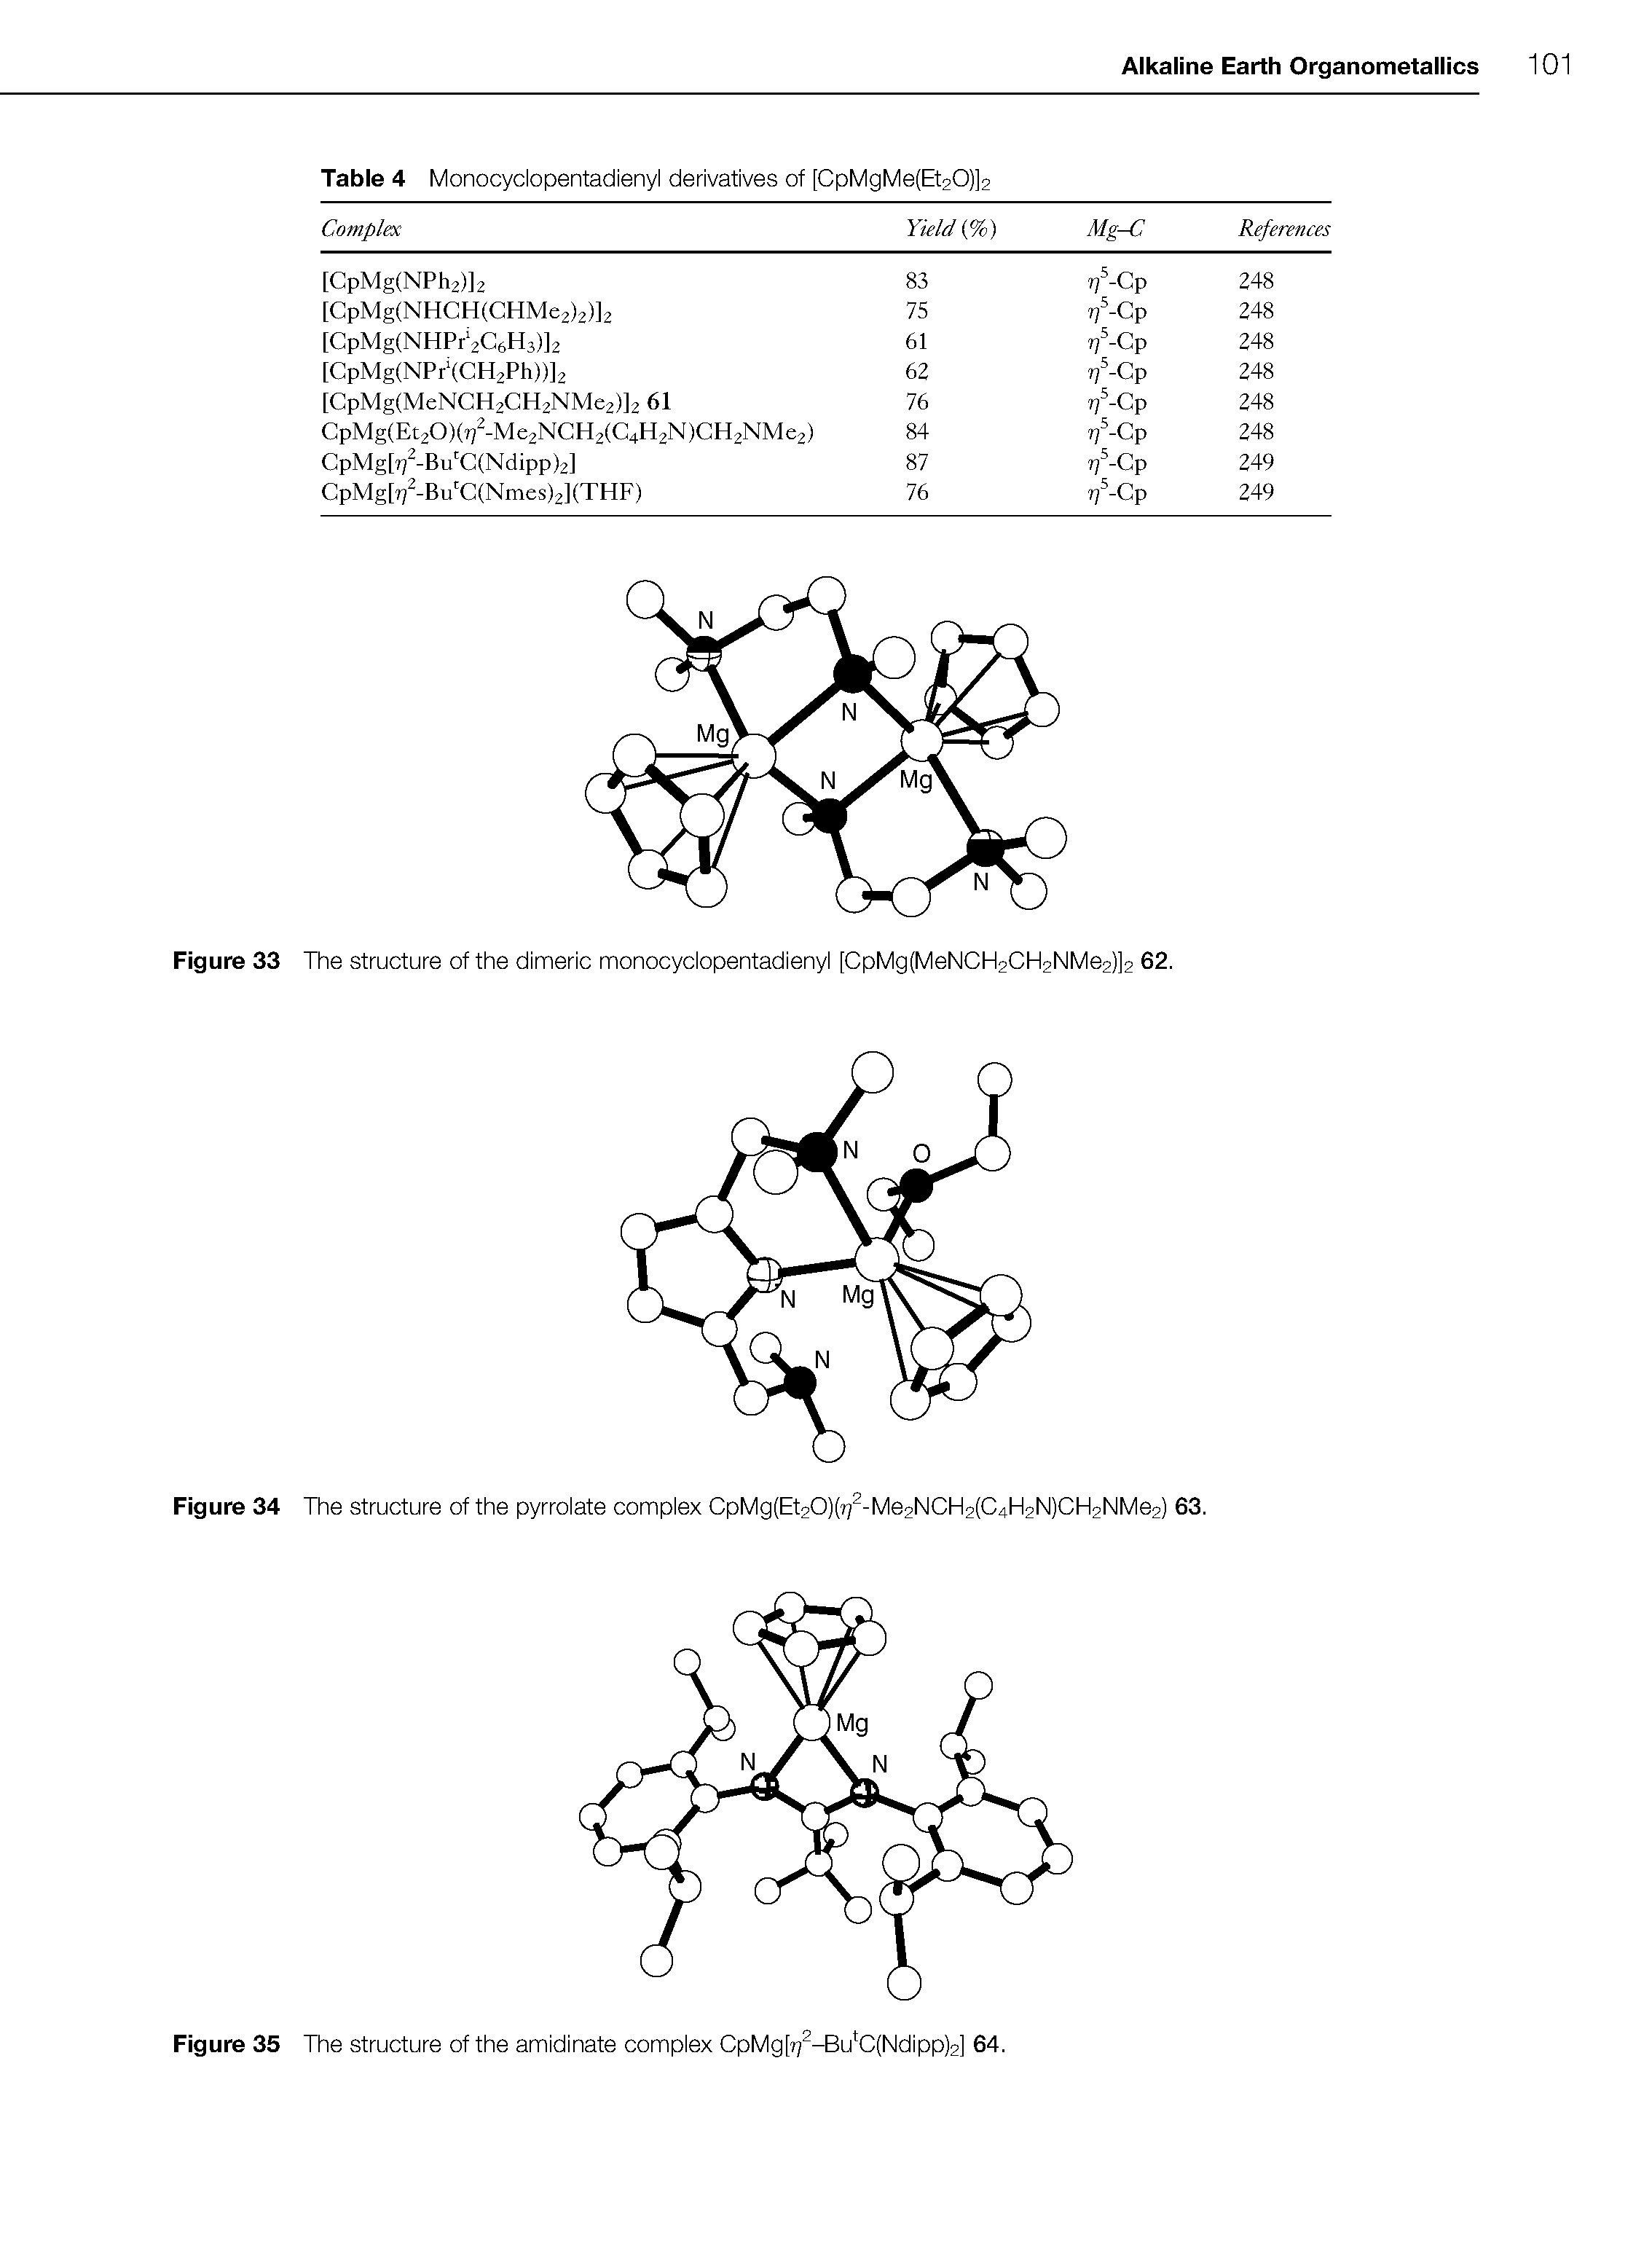 Figure 33 The structure of the dimeric monocyclopentadienyl [CpMg(MeNCH2CH2NMe2)]2 62.